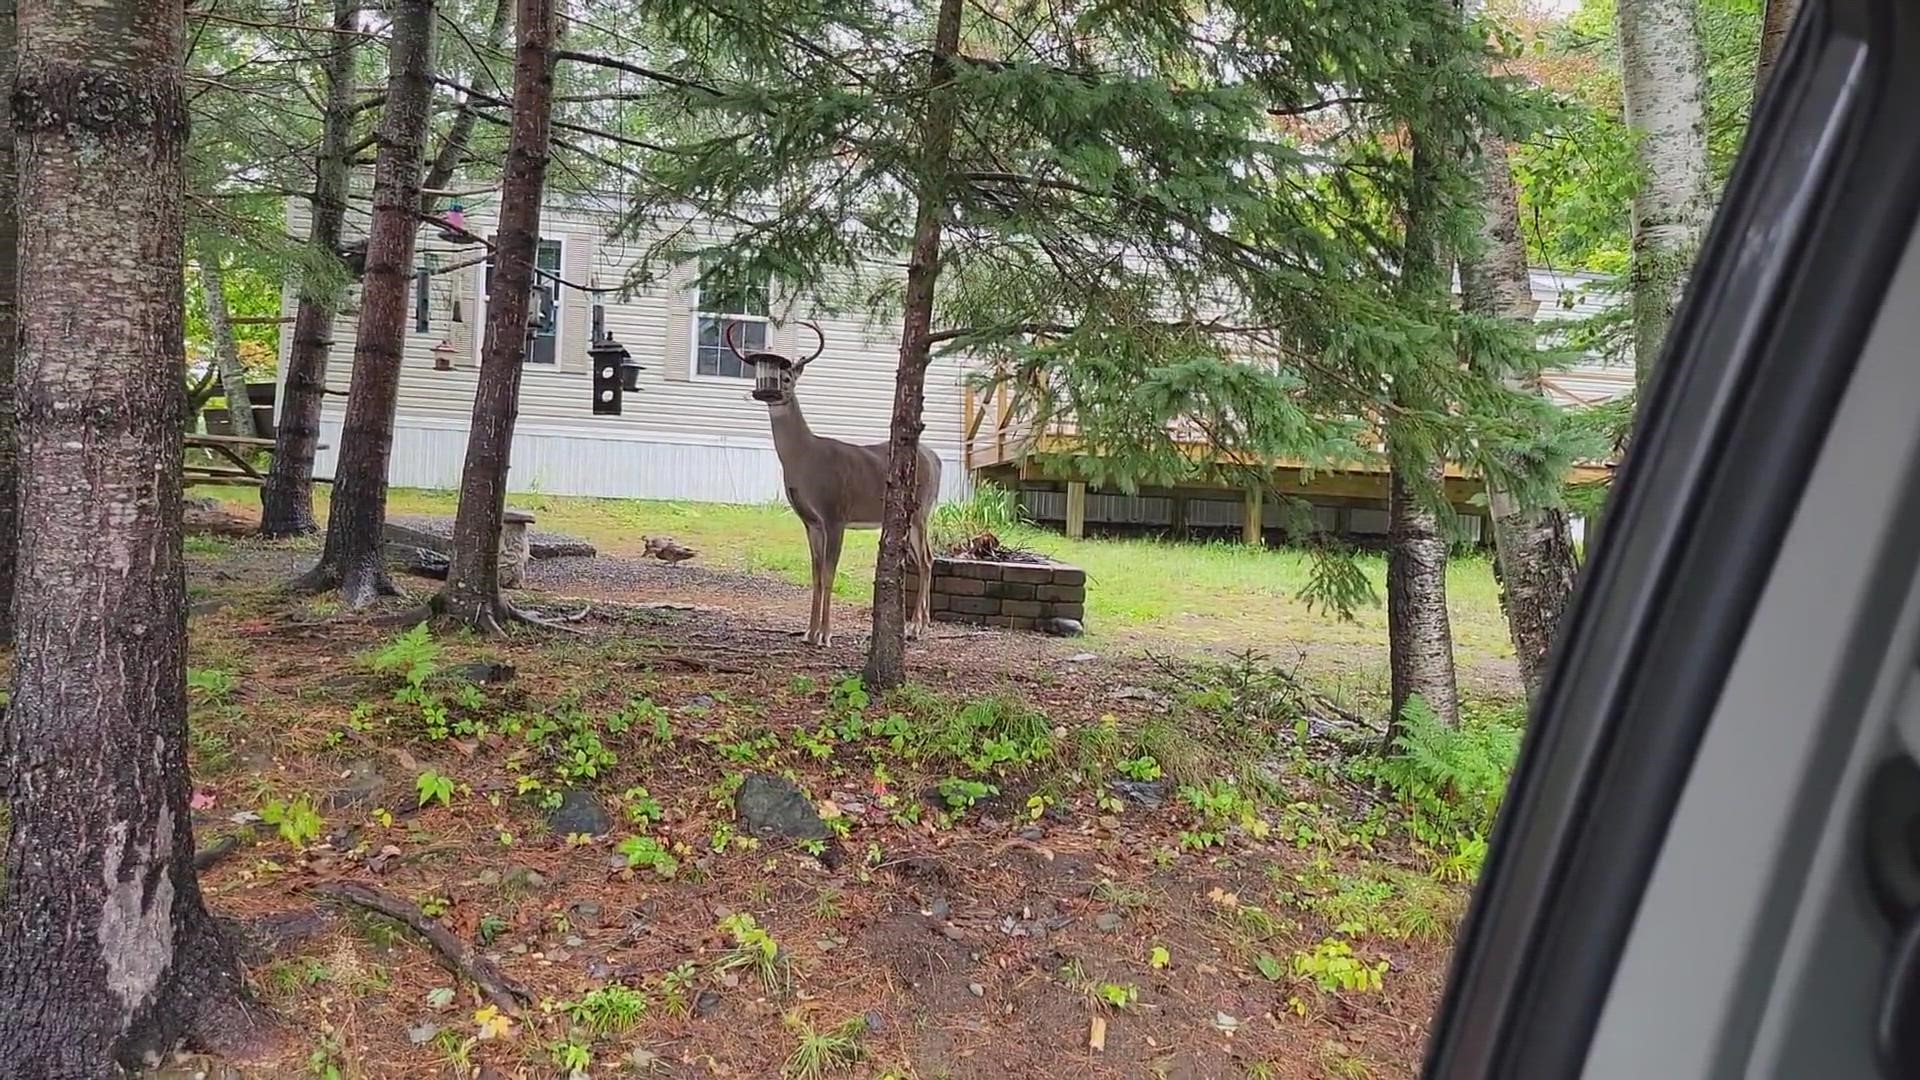 Deer spotted eating from bird feeders.
Credit: Submitted without credit.